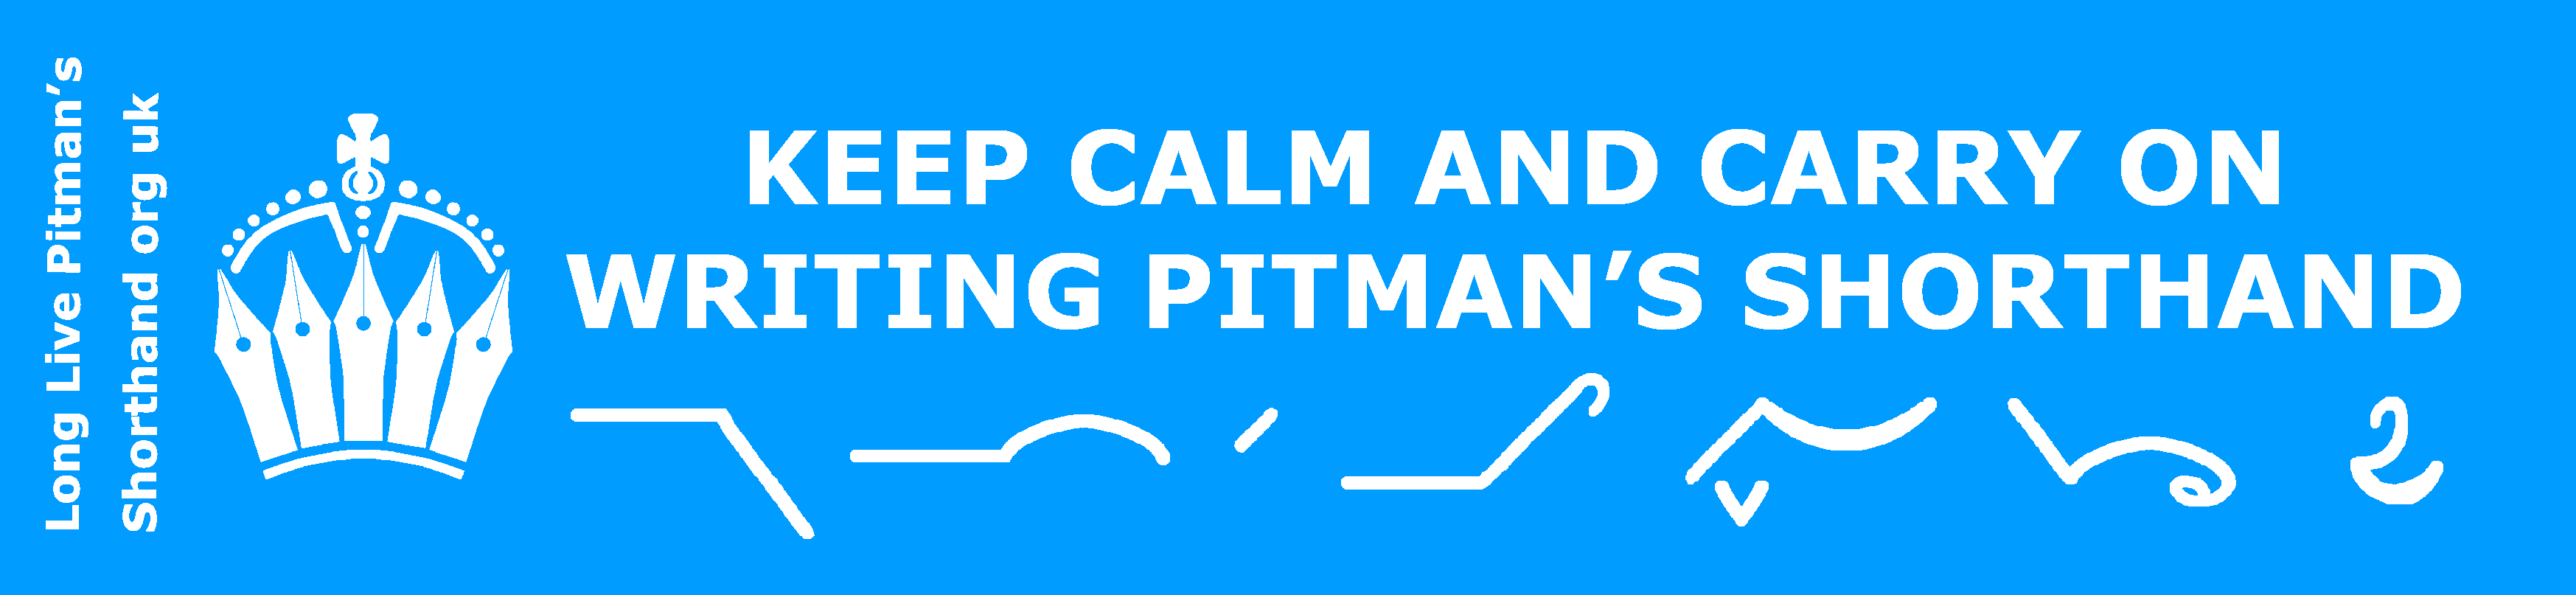 Keep Calm And Carry On Writing Pitman's Shorthand - bookmark